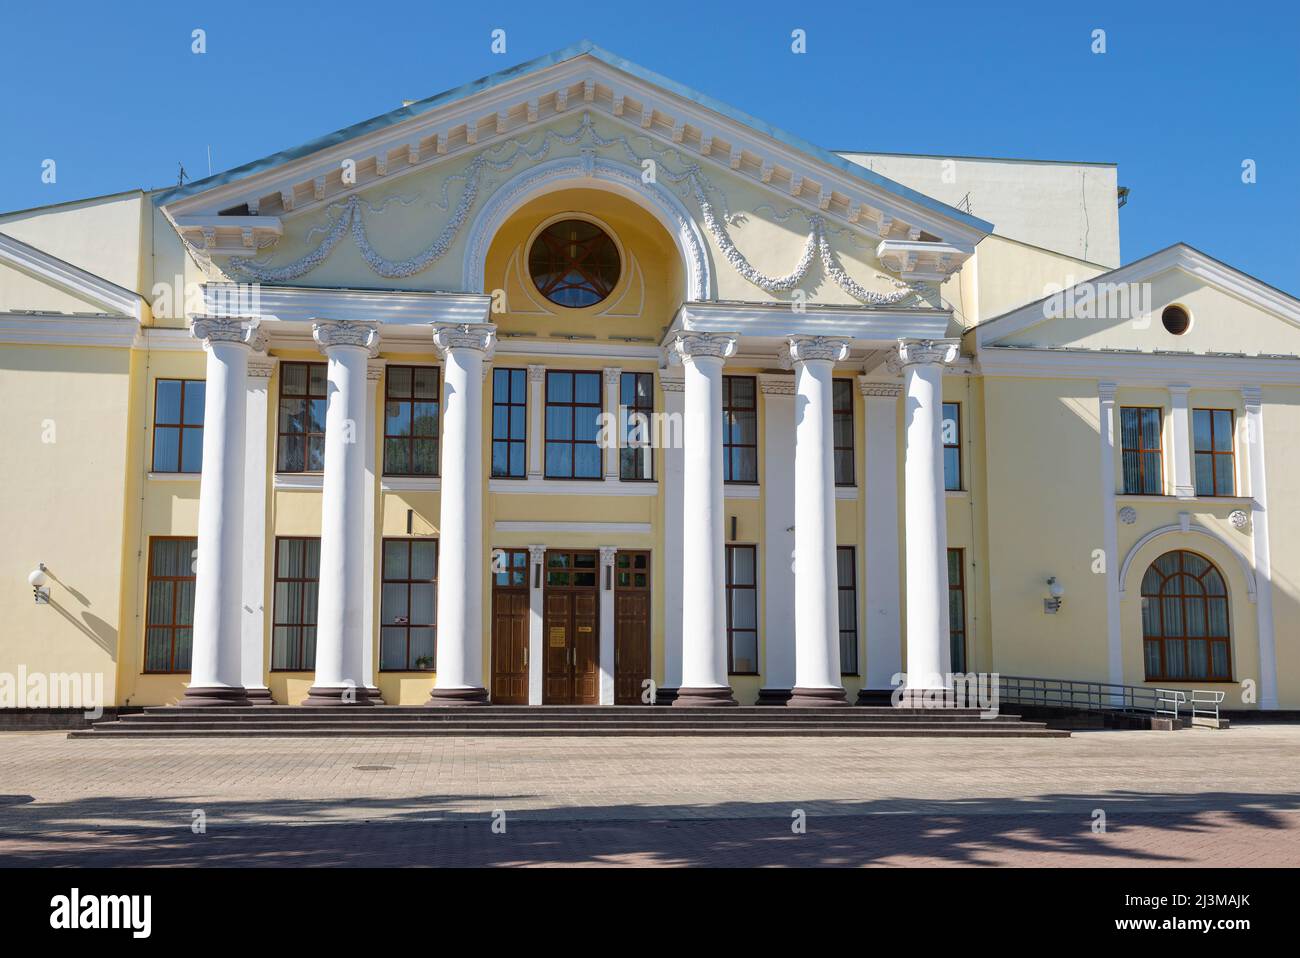 VELIKIE LUKI, RUSSIA - JULY 04, 2018: Facade and main entrance of the Velikie Luki Drama Theater on a sunny July day Stock Photo